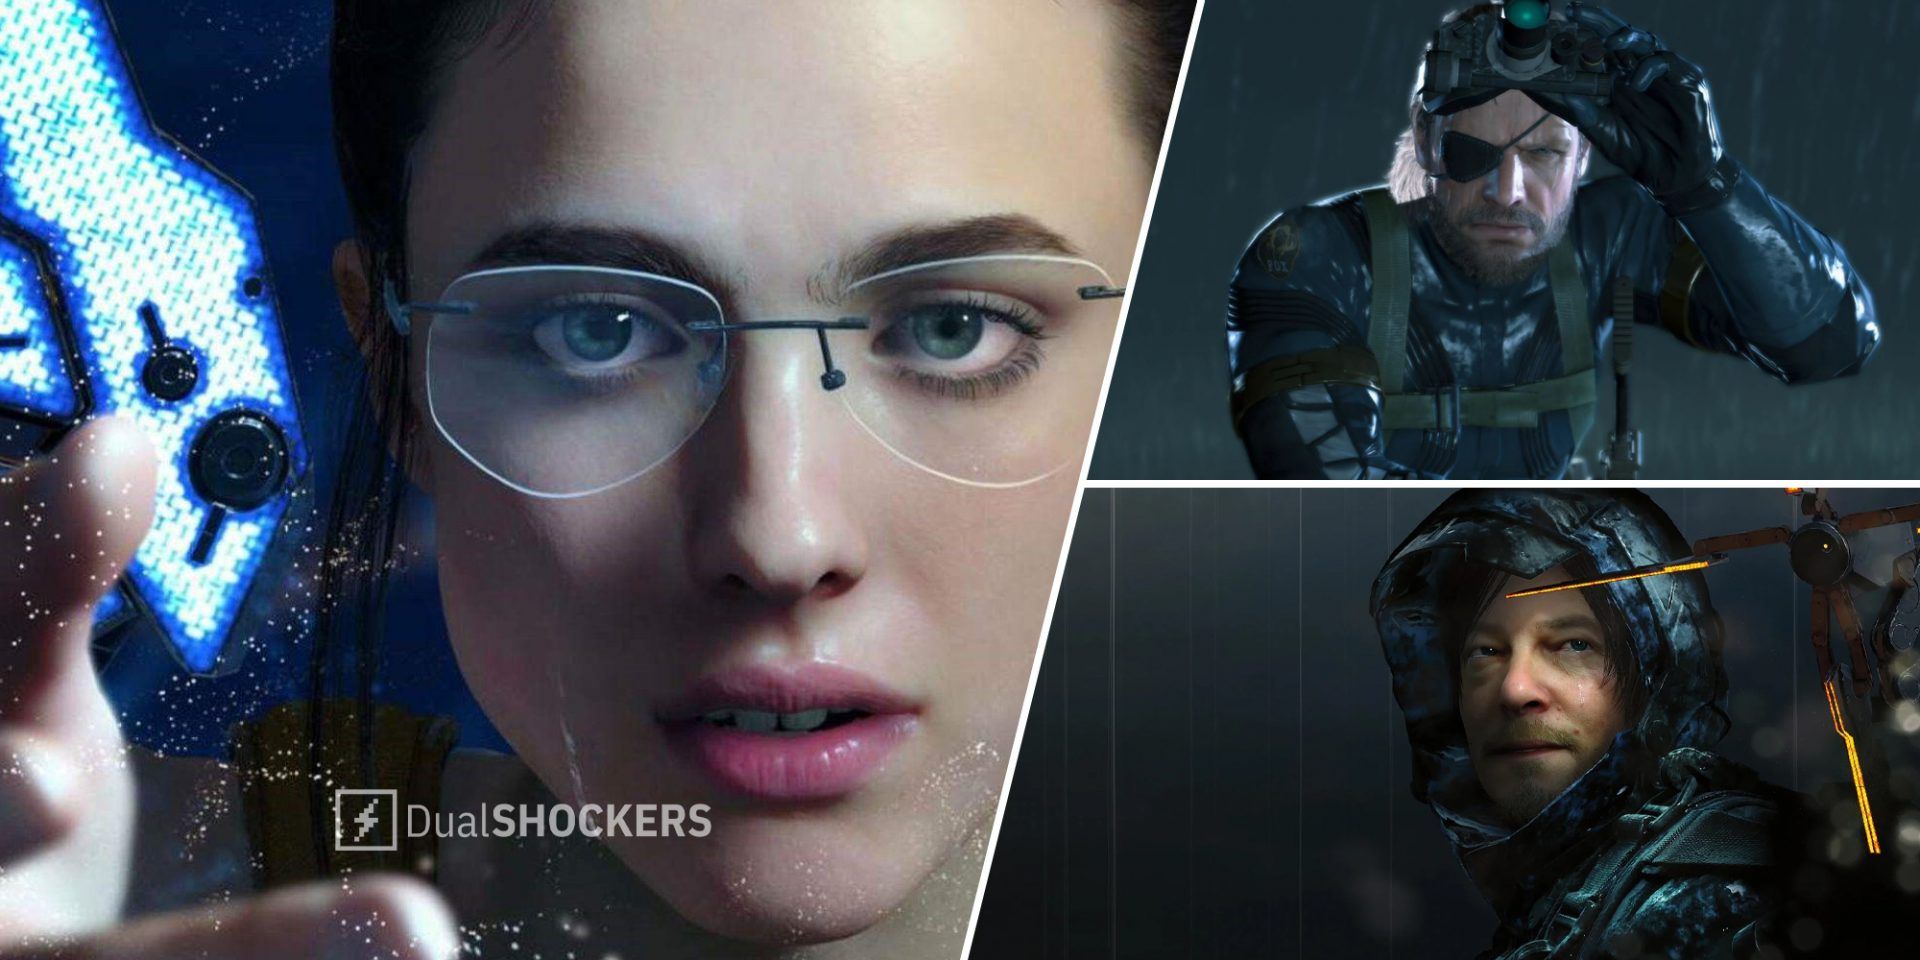 Death Stranding Mama character played by Margaret Qualley who will star in new game Overdose on left, Metal Gear Solid game on top right, Death Stranding Sam Porter on bottom right